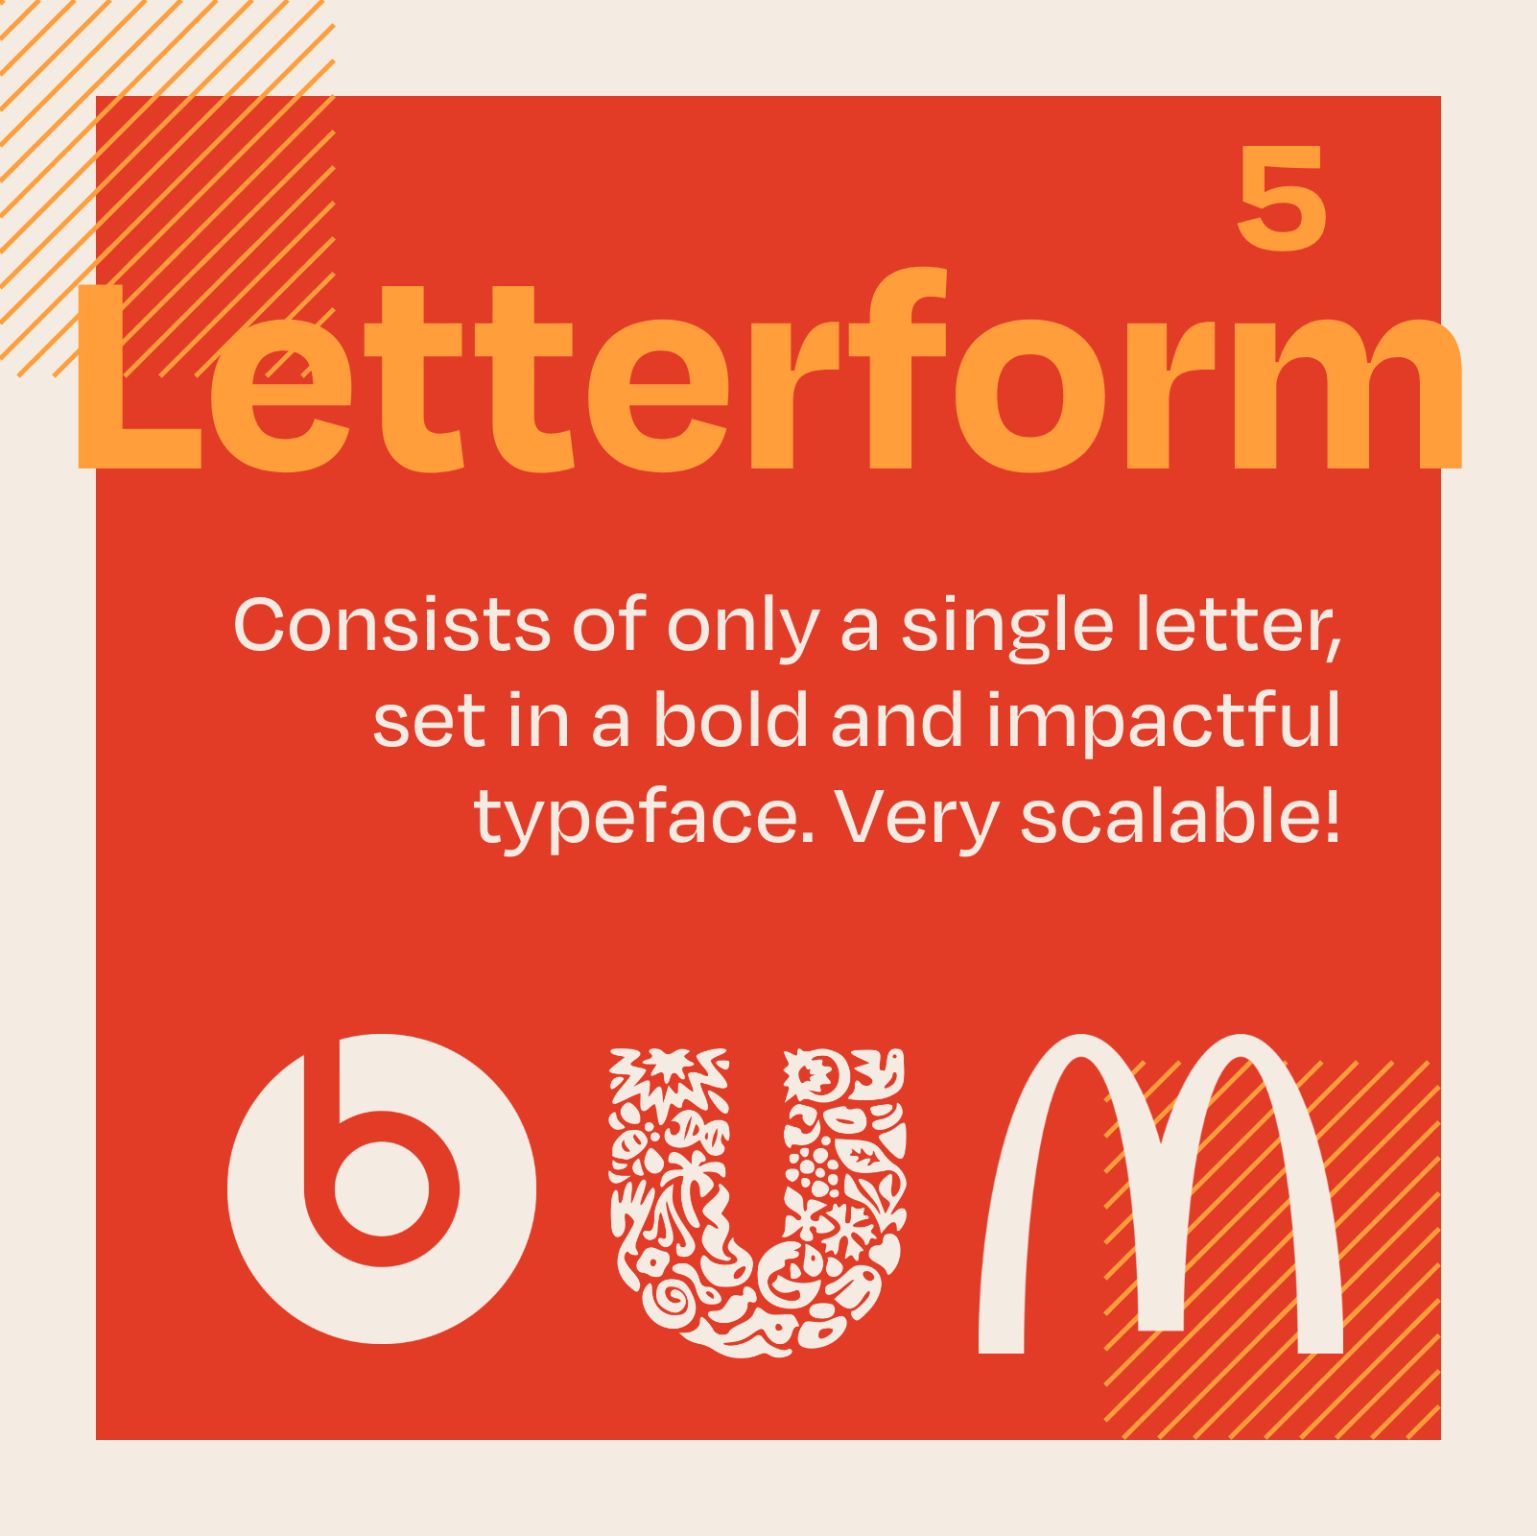 Types Of Logos - Letterform